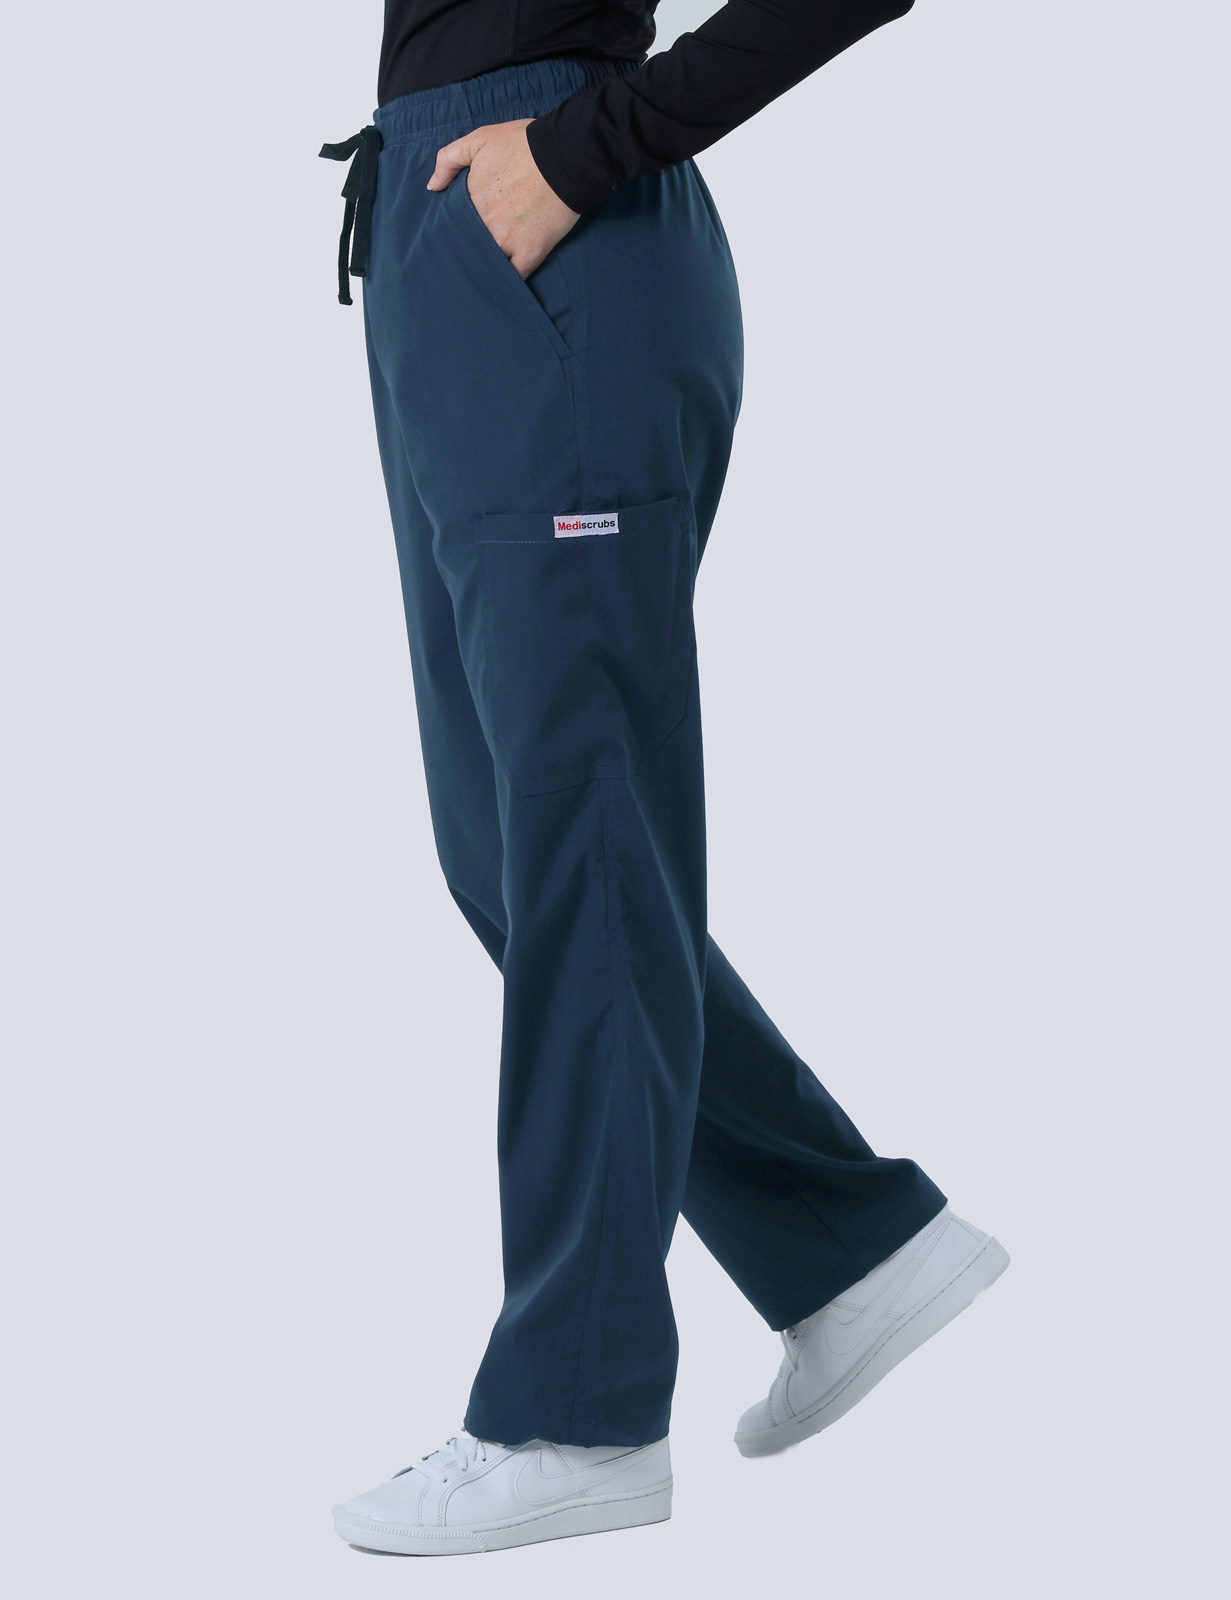 VRH (4 Pocket Scrub Top and Cargo Pants in Navy incl Logos)